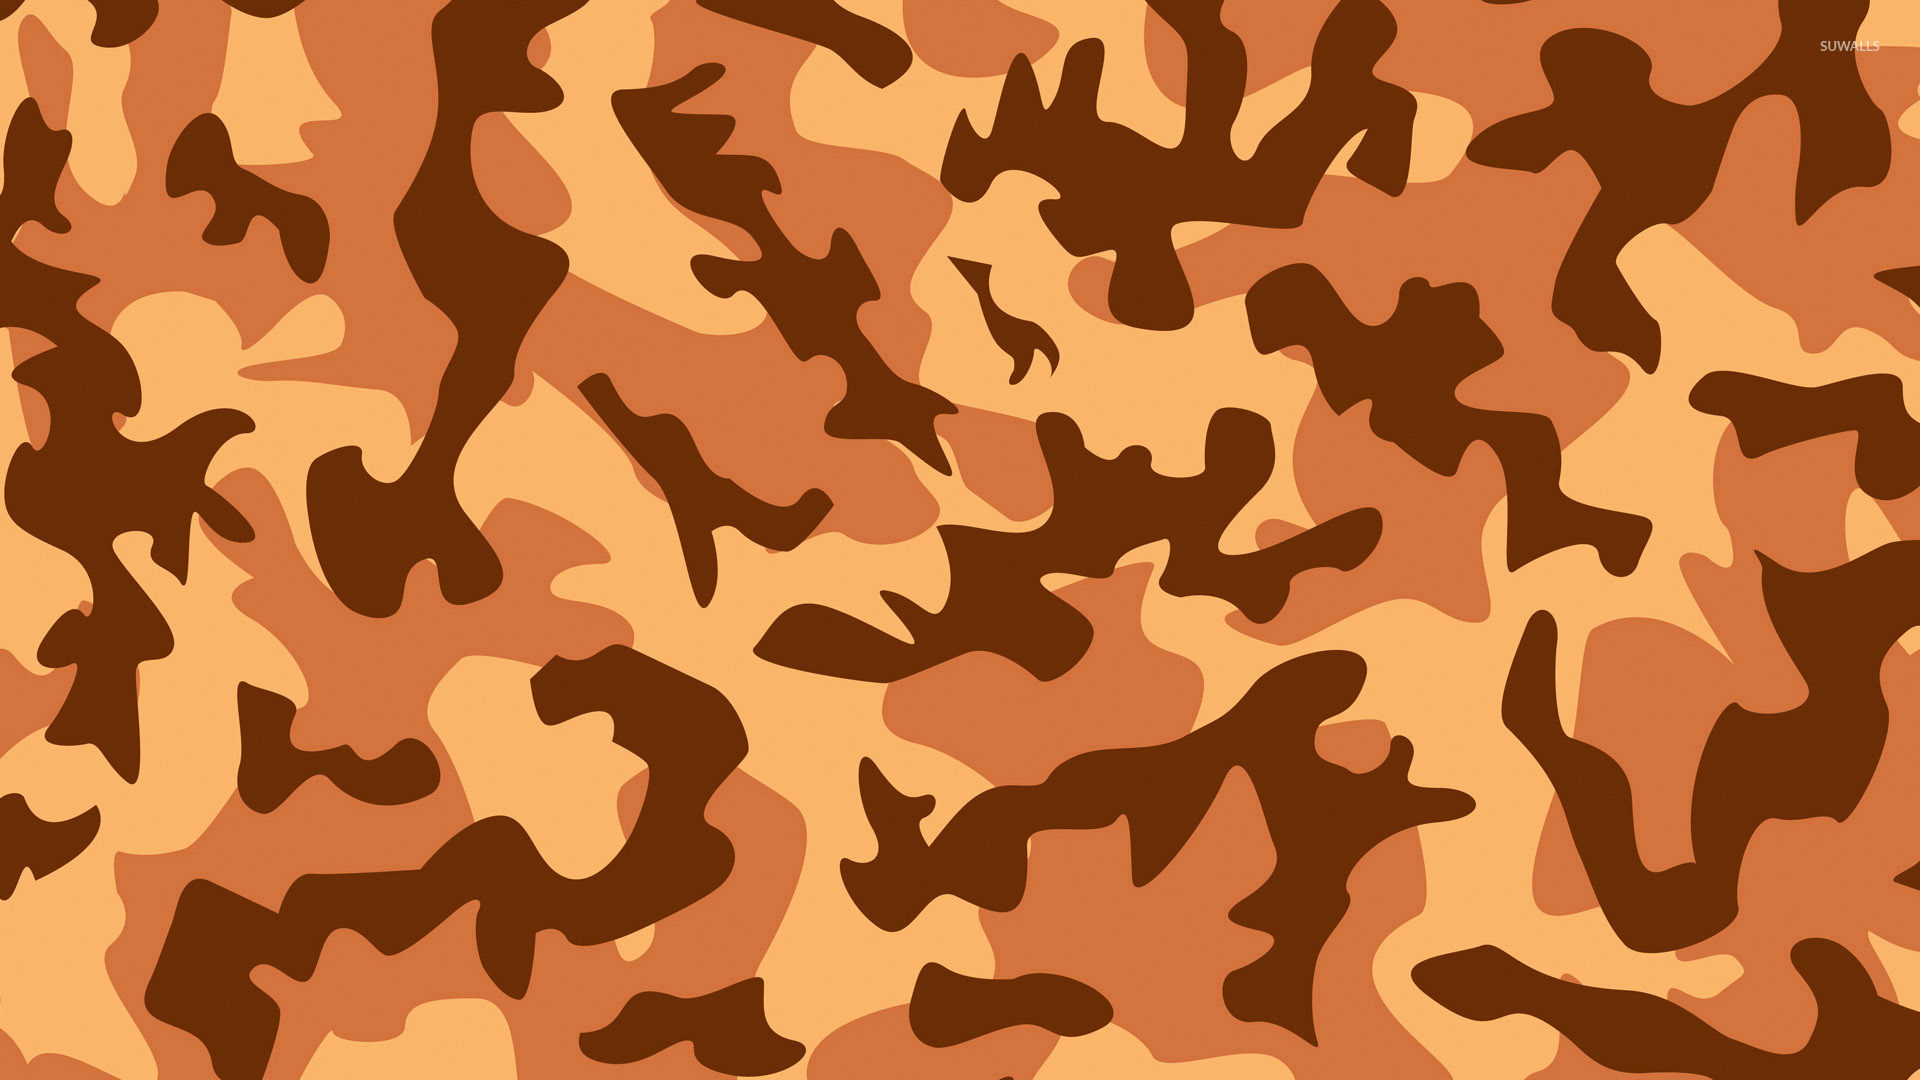 Camouflage 2 wallpaper